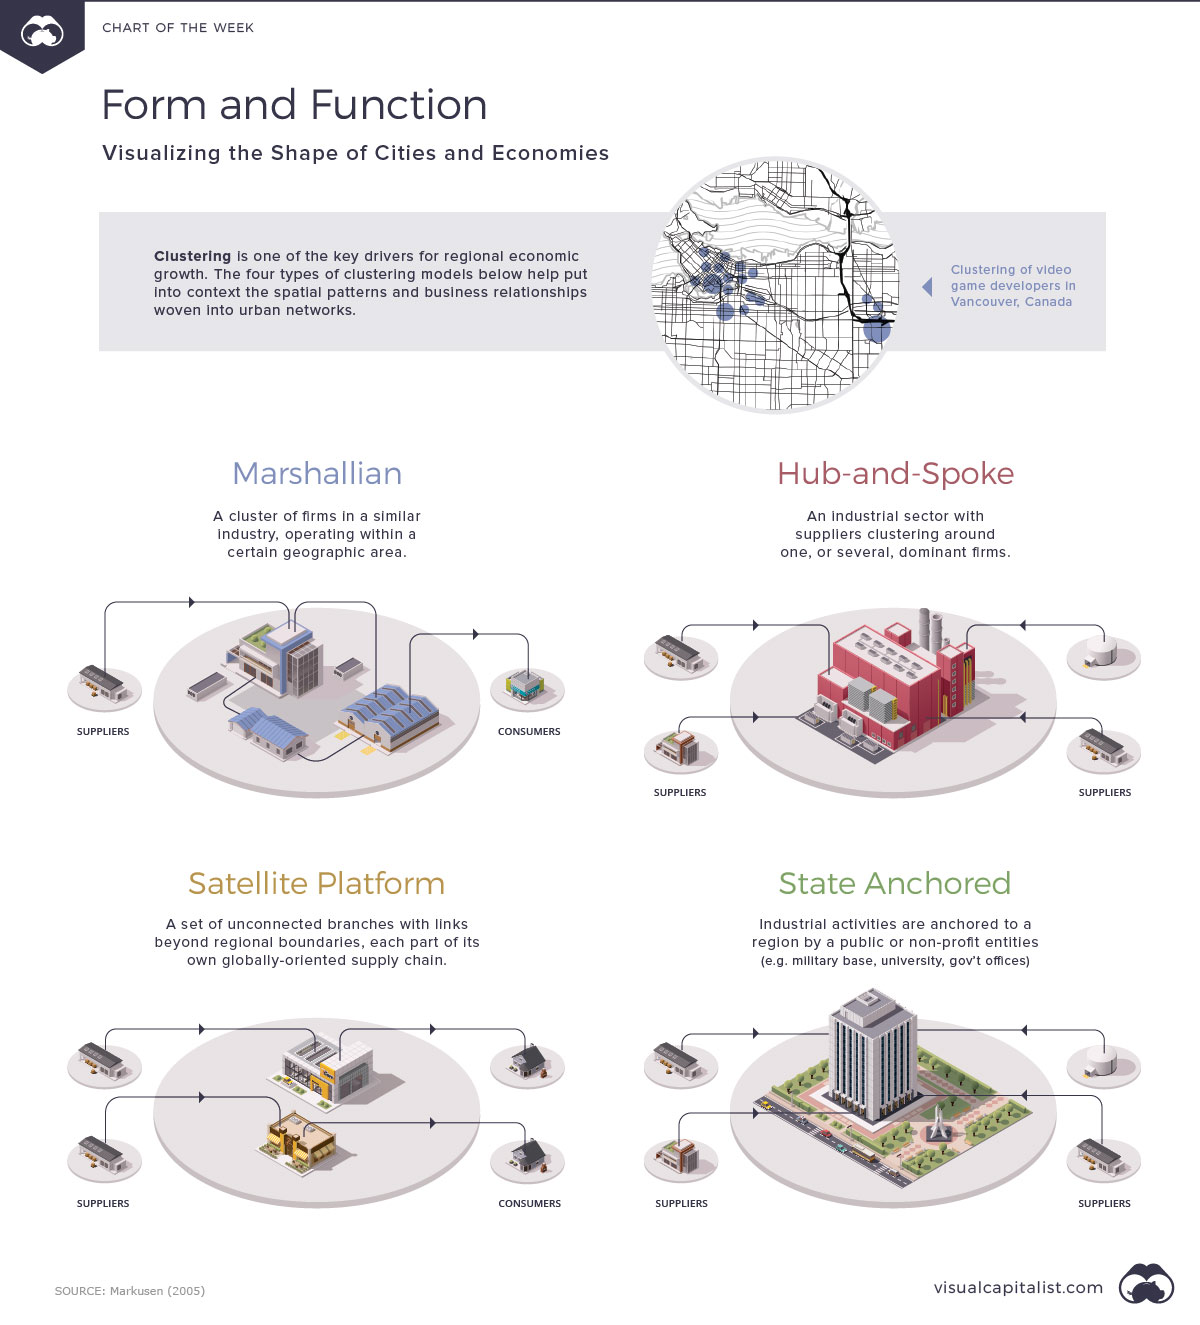 Form and Function: Visualizing the Shape of Cities